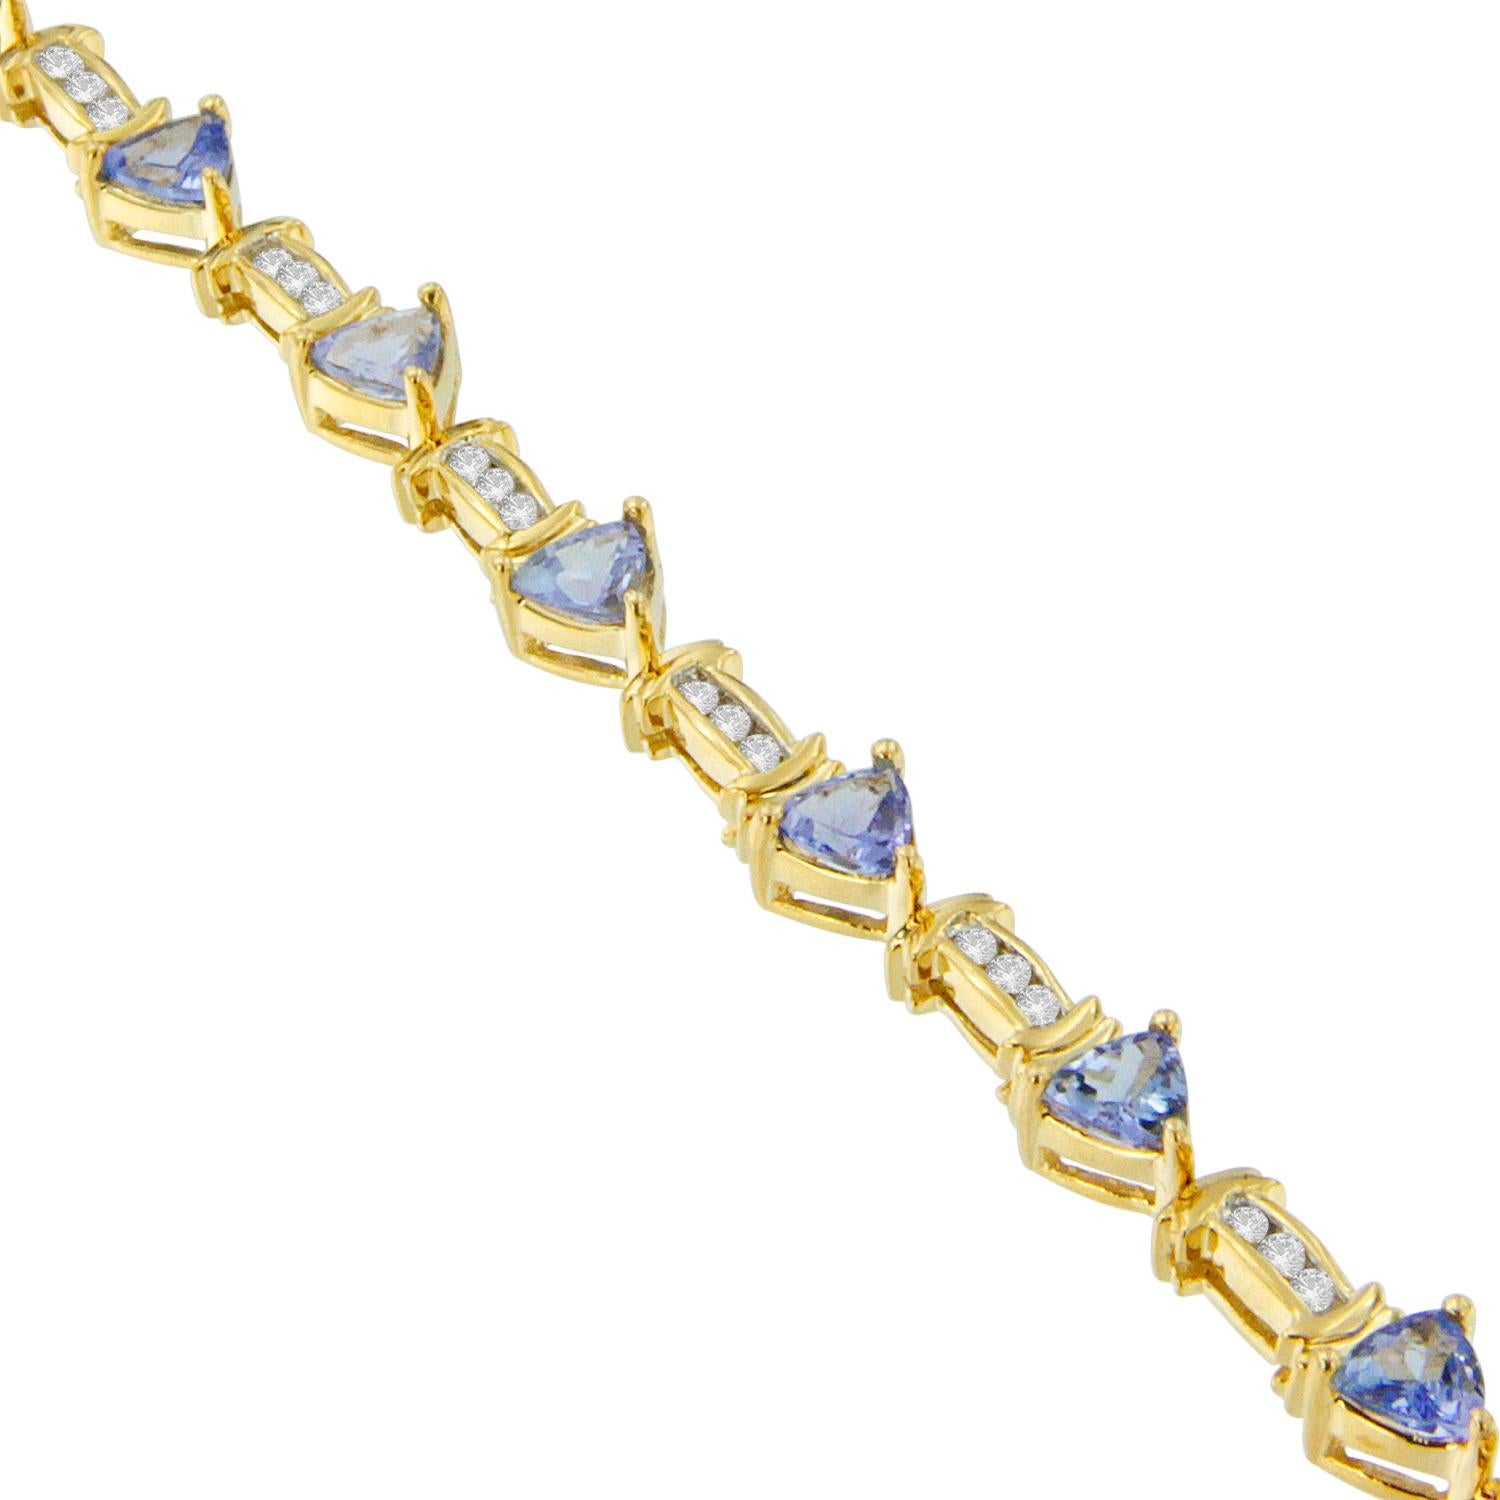 Delight and dazzle her with this graceful diamond fashion bracelet. Fashioned in an alternative geometric pattern, it is composed of 14 karats yellow gold and will look lovely with any attire. This classic jewelry is adorned in a unique setting with